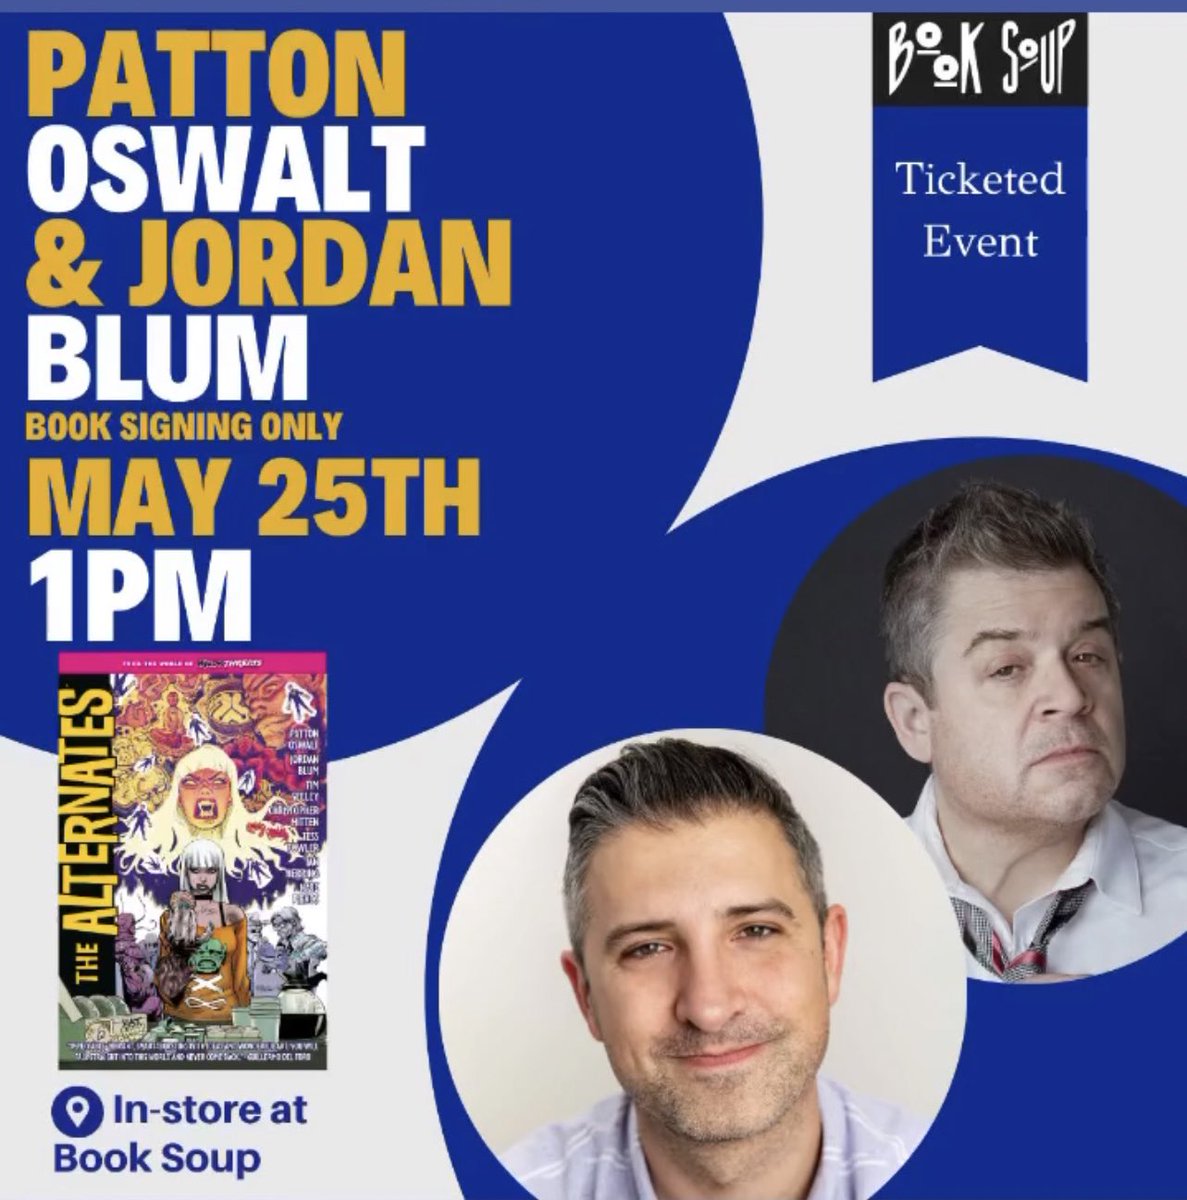 Catch Patton and Jordan next at @BookSoup May 25th at 1pm!